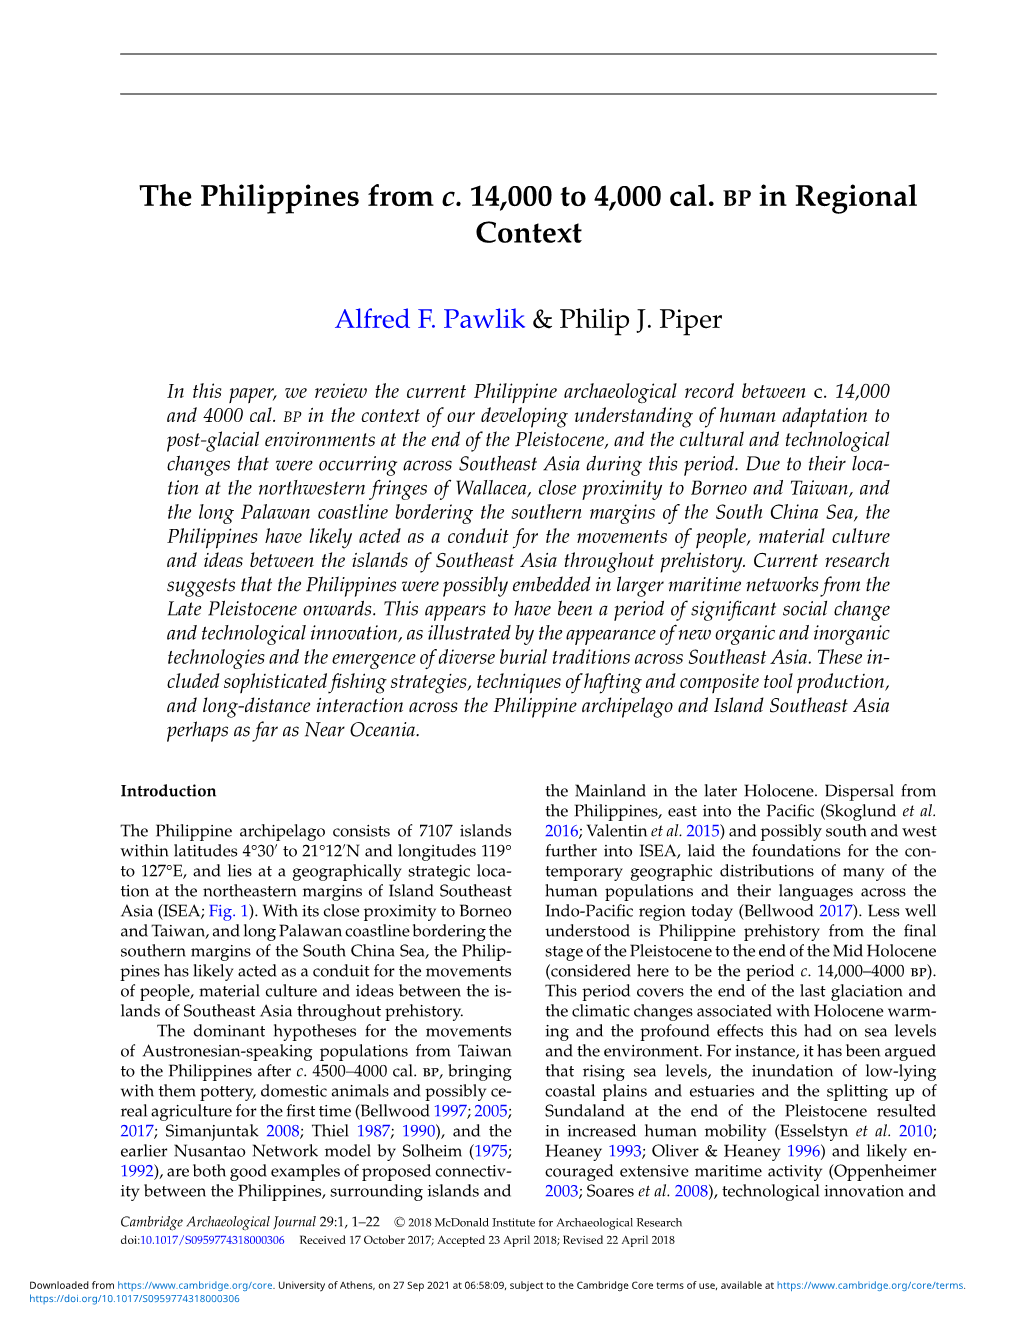 The Philippines from C. 14,000 to 4,000 Cal. BP in Regional Context